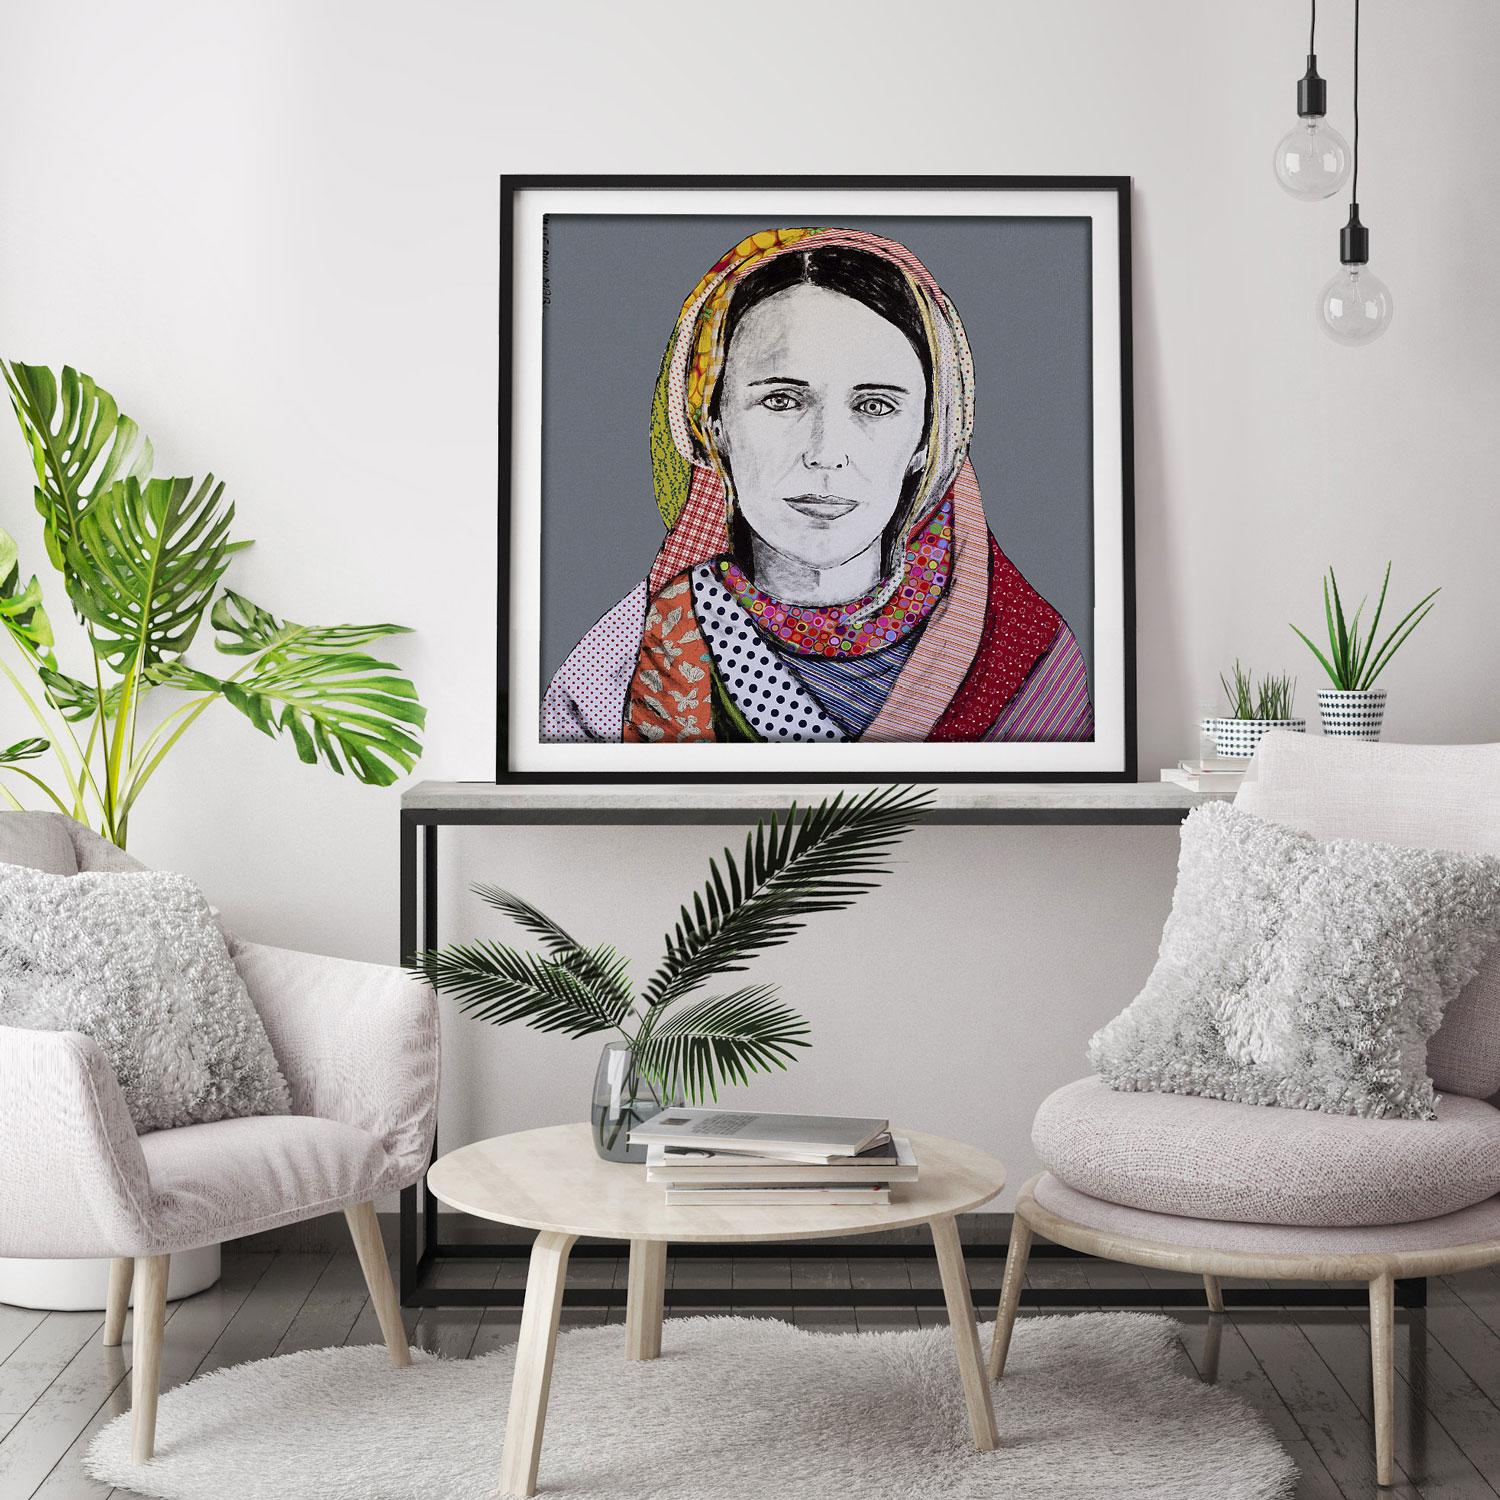 Animal Print - Gillie and Marc - Art - Limited Edition - Women - Equality 2019 - Gray Portrait Painting by Gillie and Marc Schattner